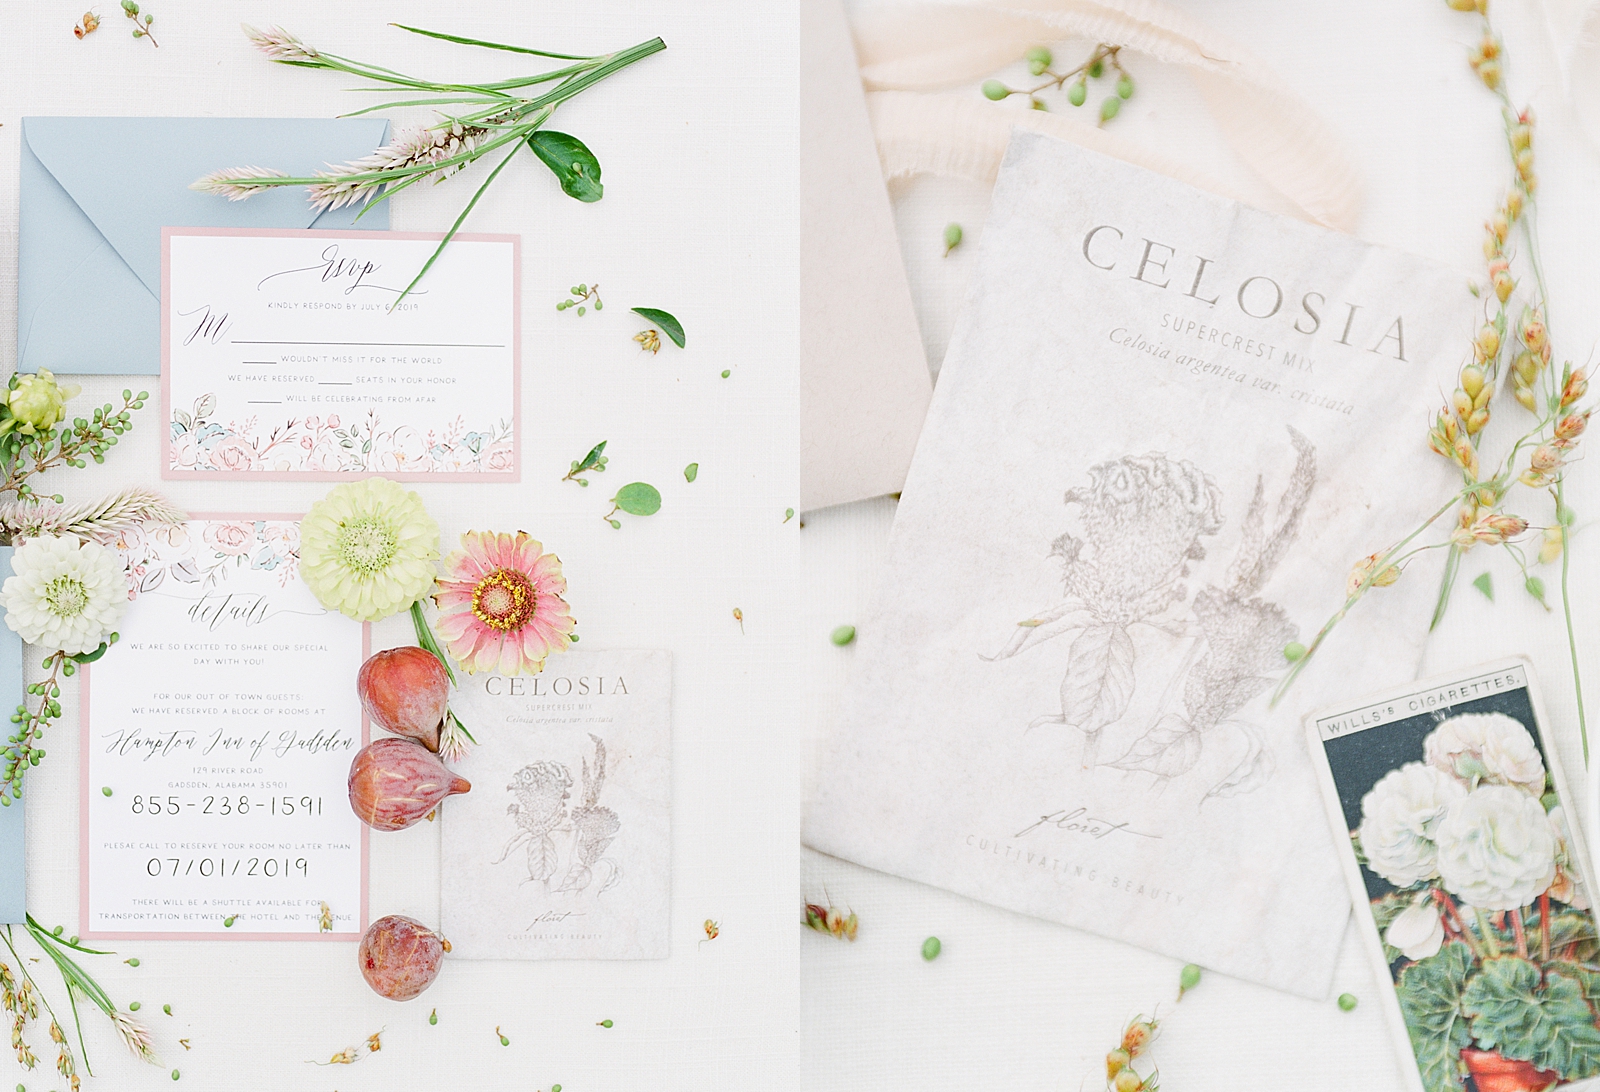 Birmingham Wedding Invitation Suite with Figs and Detail Photos